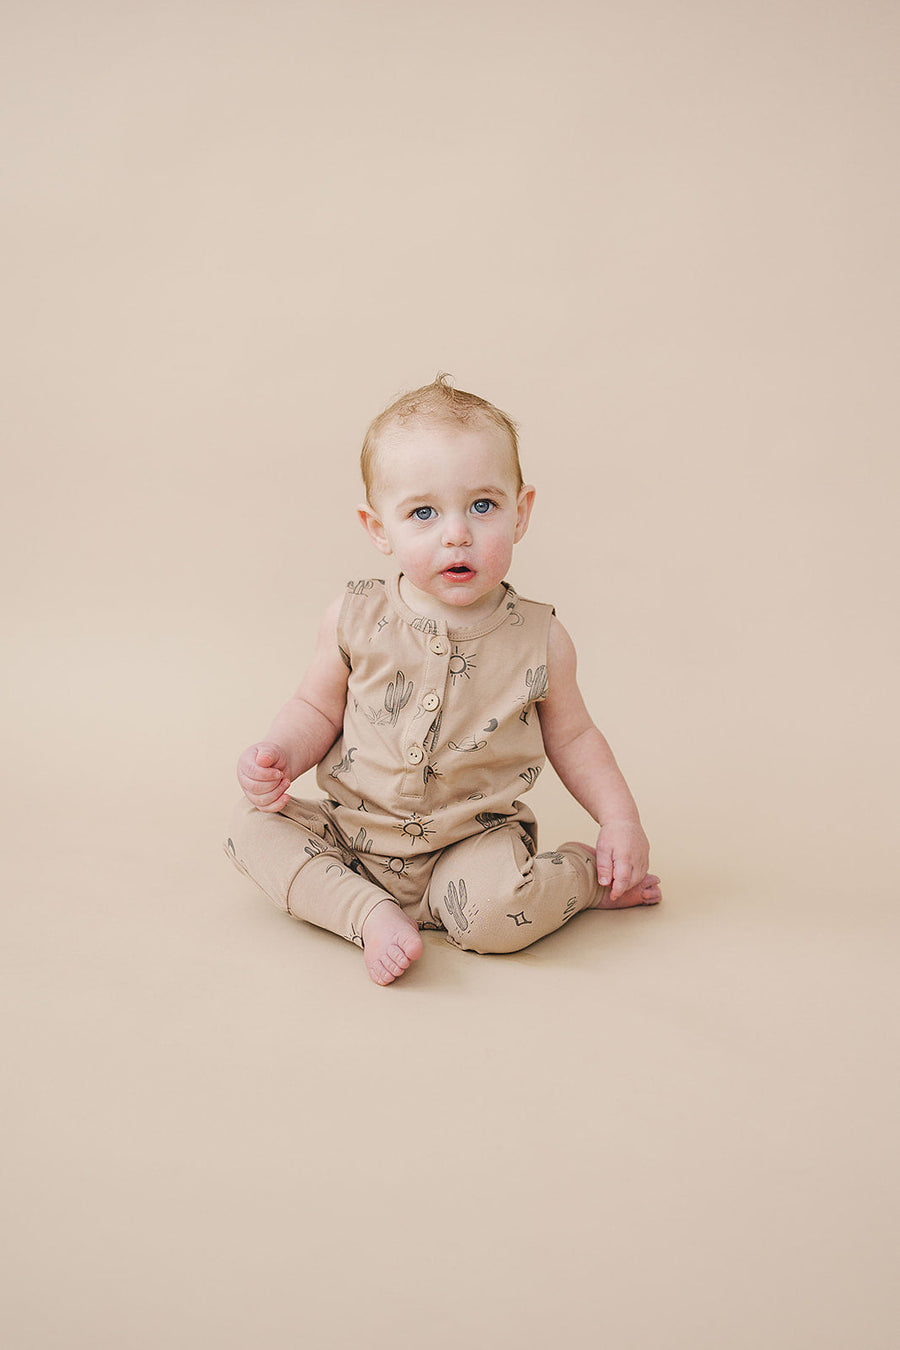 MEBIE BABY Western Tank Romper (COLLECTIVE)